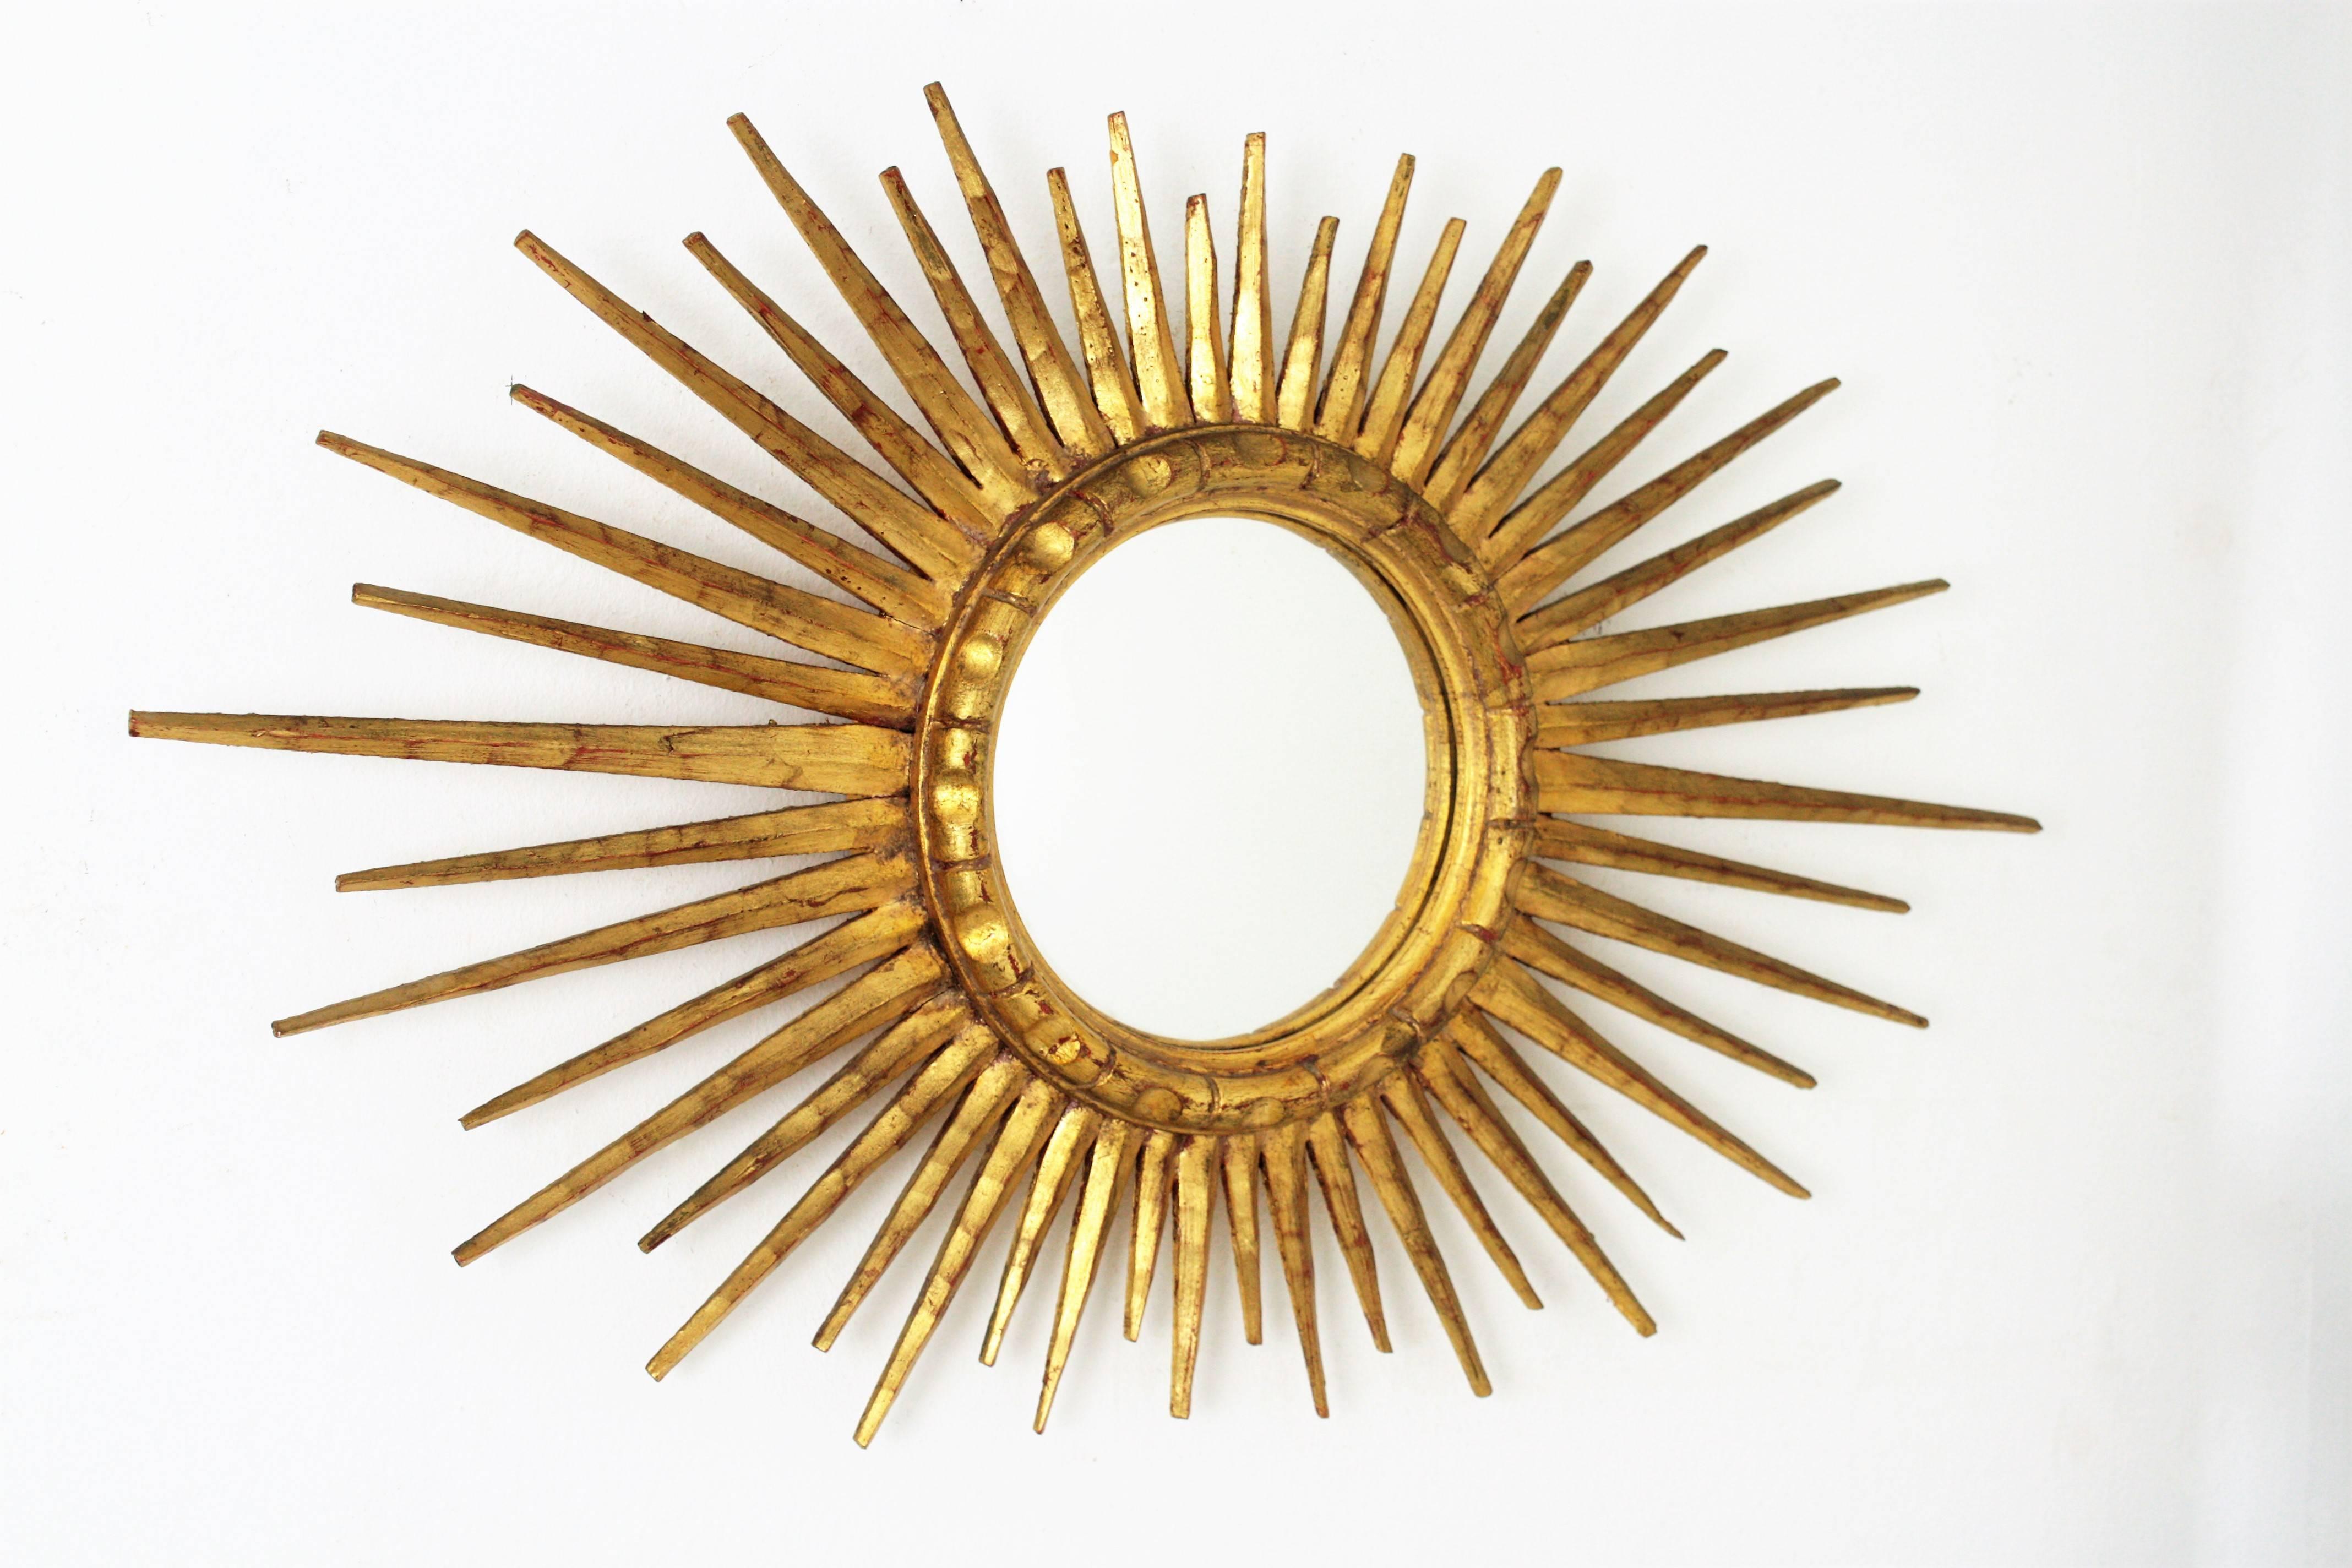 Amazing carved and giltwood Hollywood Regency oval shaped sunburst mirror with 24 karat gold leaf finish. This piece wears its original and excellent patina and due to its oval shape, with beams in different sizes it is highly decorative. It can be